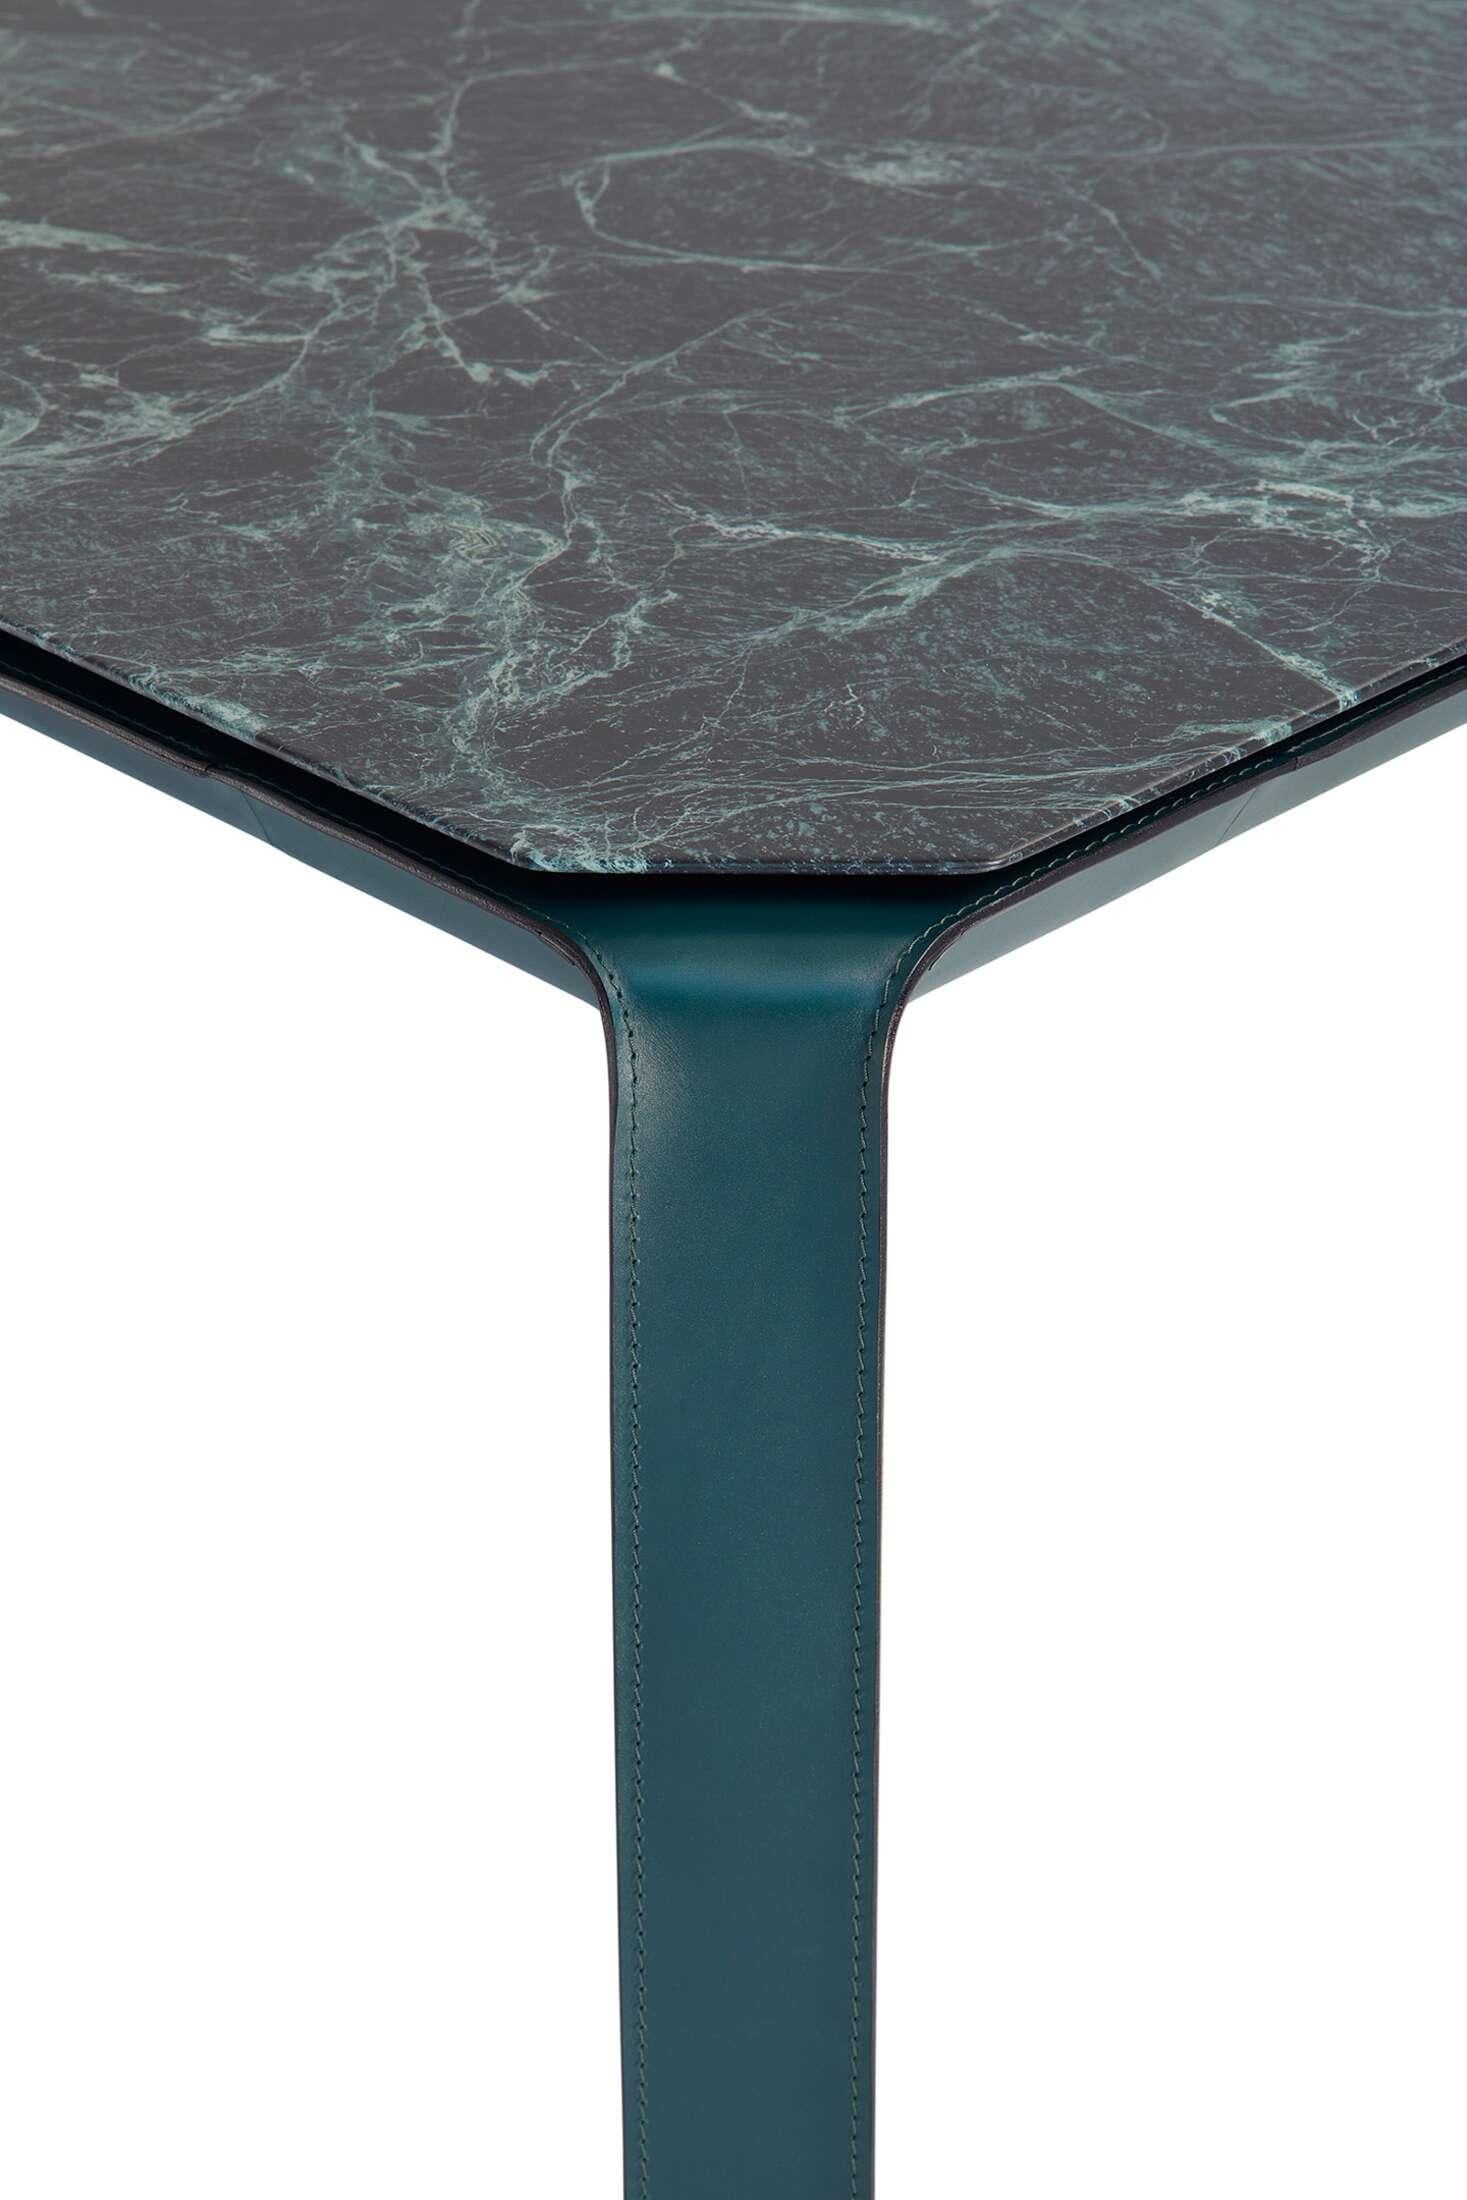 cassina cab table